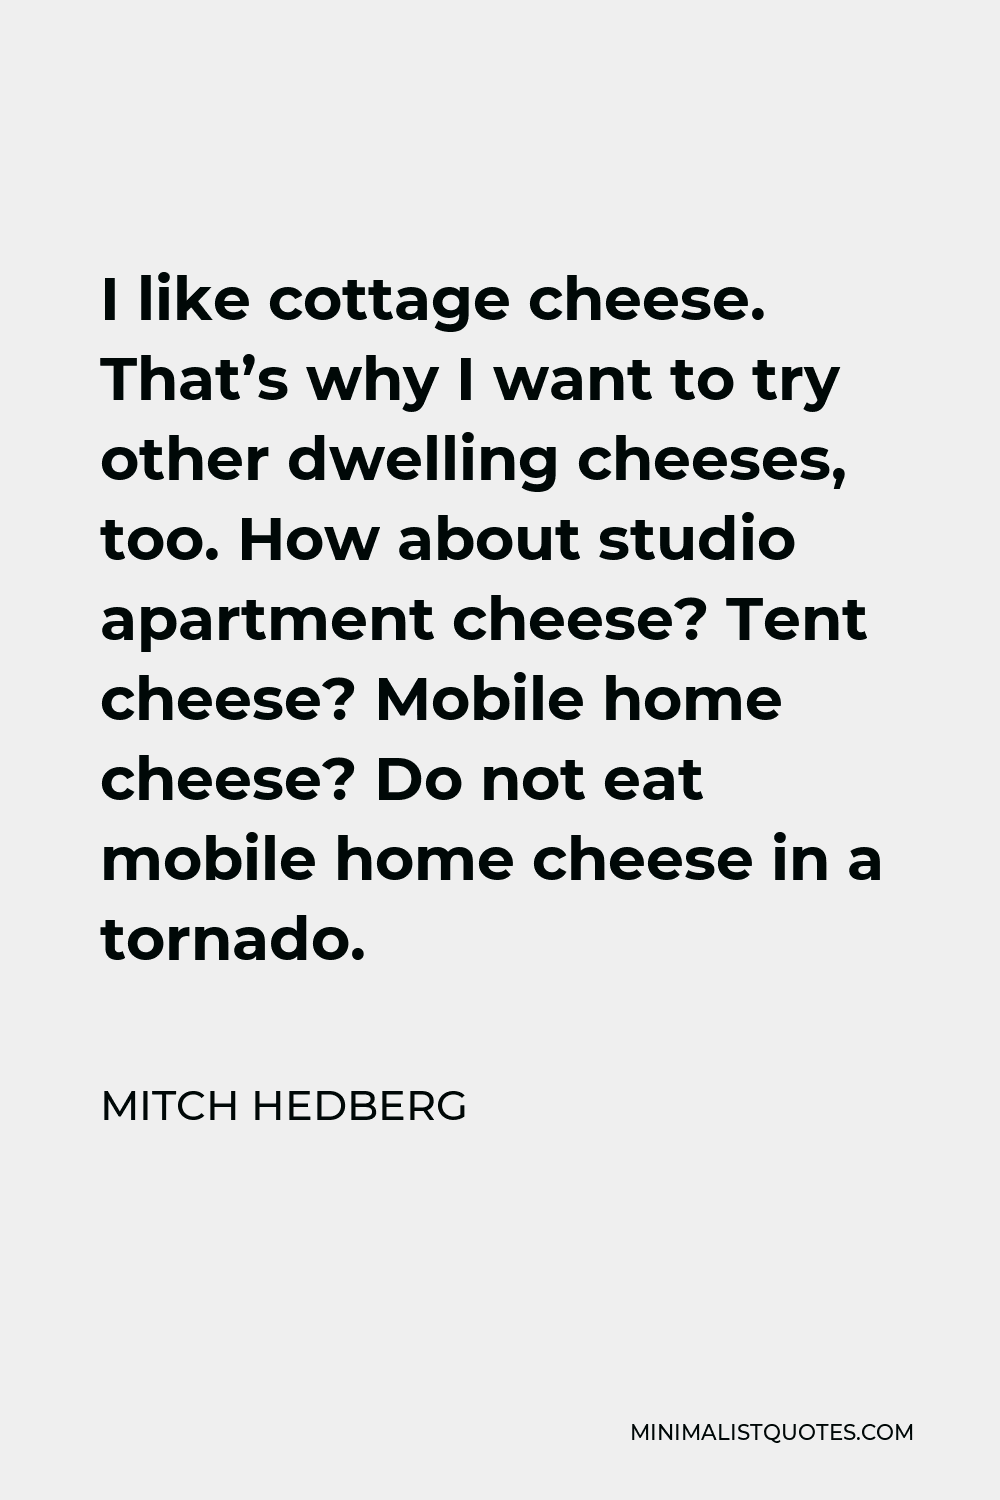 Mitch Hedberg Quote - I like cottage cheese. That’s why I want to try other dwelling cheeses, too. How about studio apartment cheese? Tent cheese? Mobile home cheese? Do not eat mobile home cheese in a tornado.